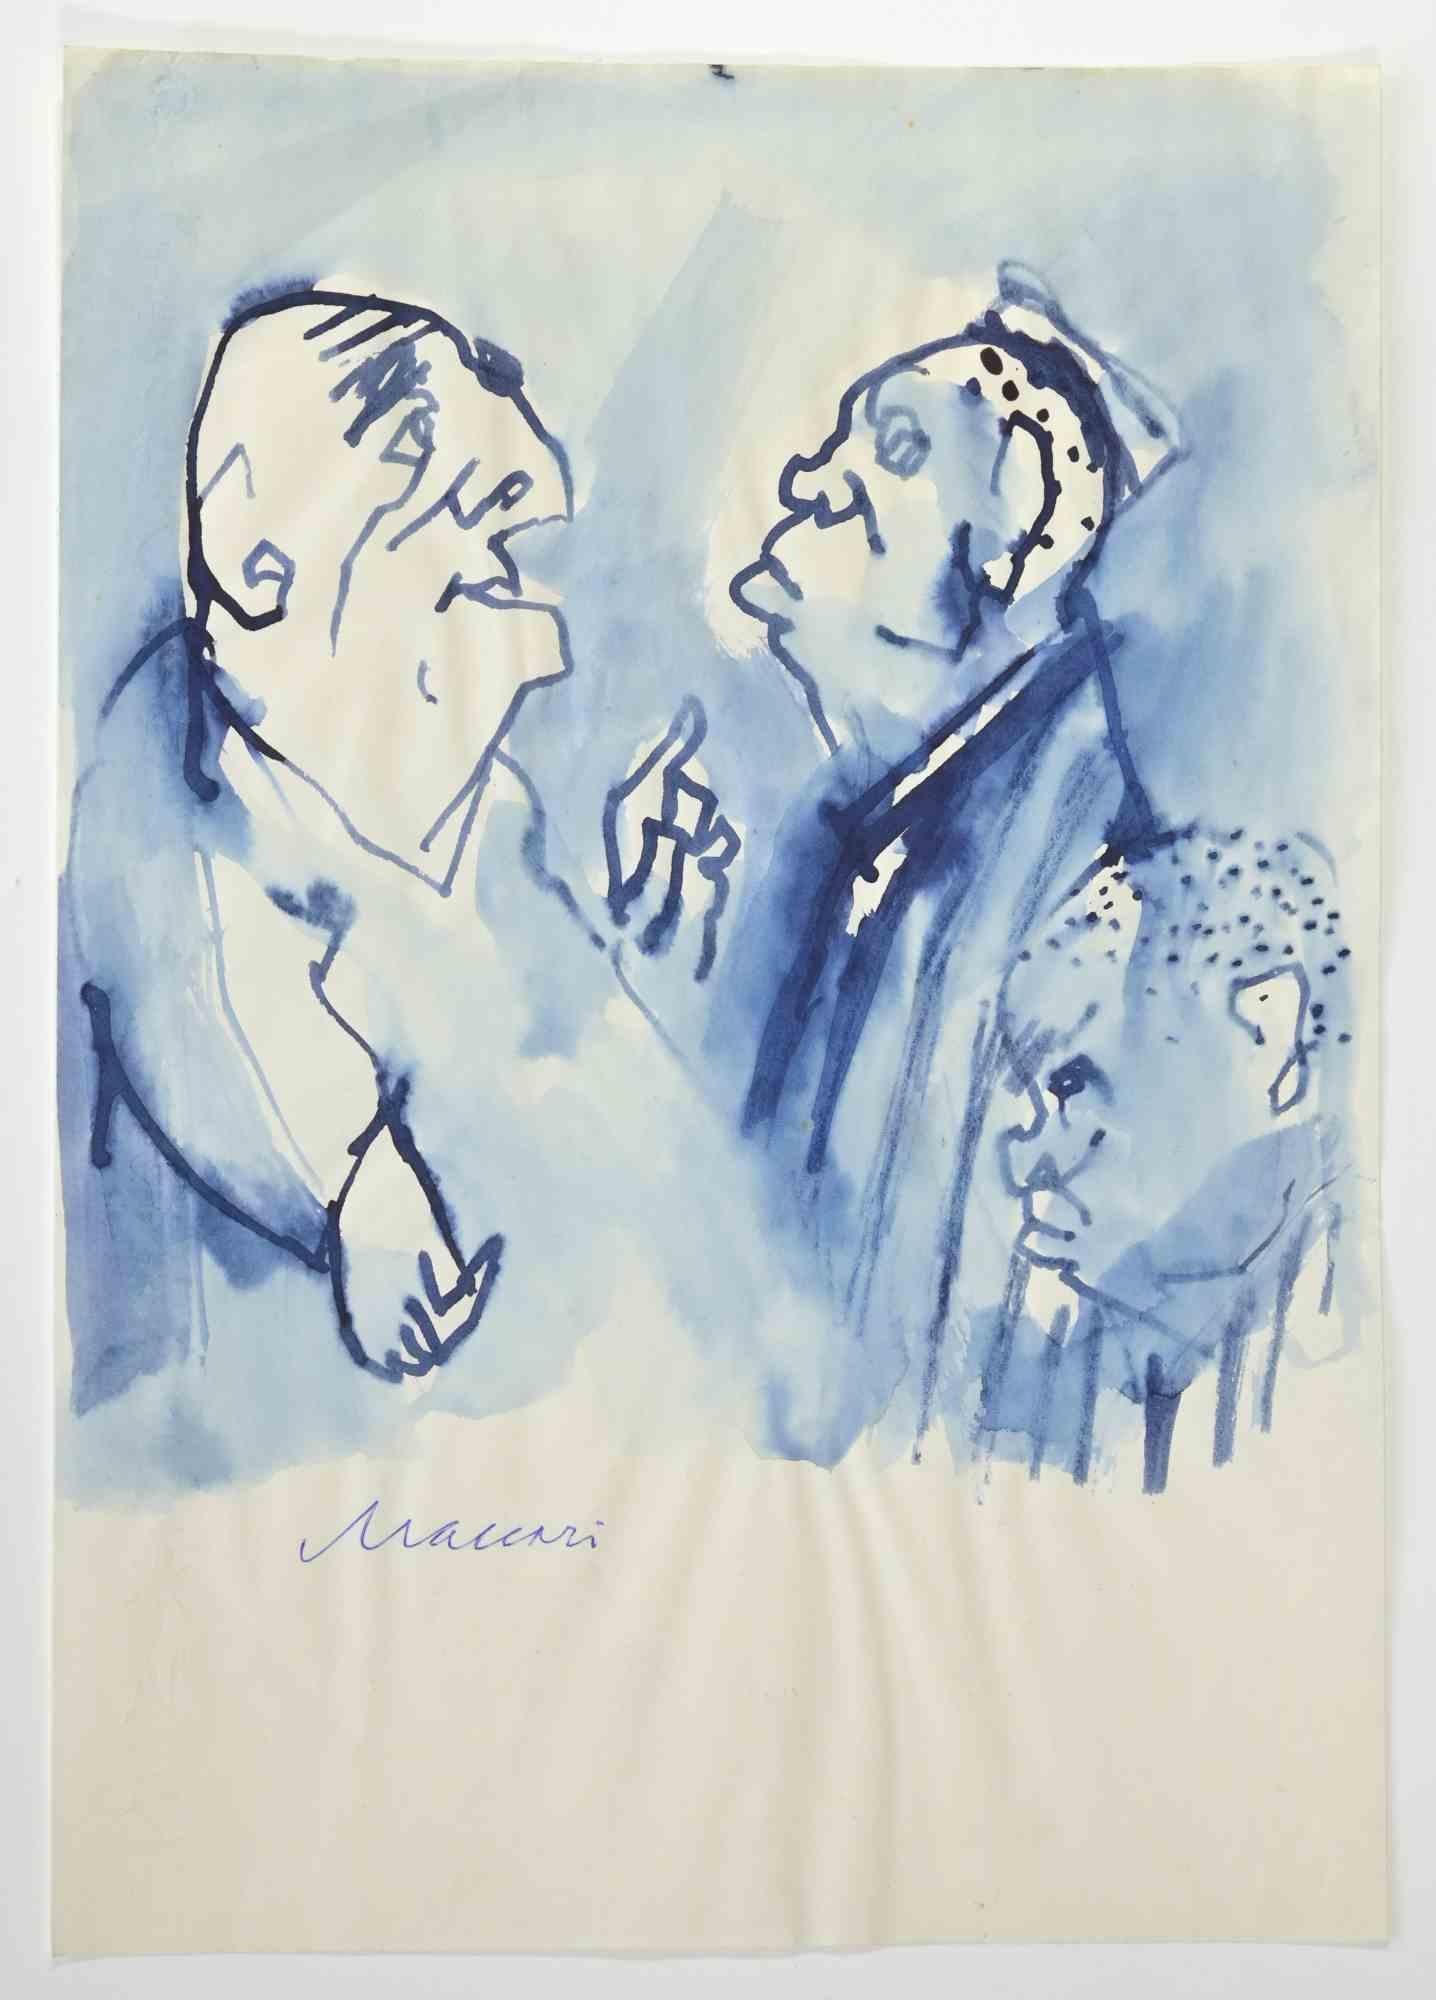 Figures is a watercolor Drawing realized by Mino Maccari  (1924-1989) in the 1965.

Hand-signed on the lower.

Good condition.

Mino Maccari (Siena, 1924-Rome, June 16, 1989) was an Italian writer, painter, engraver and journalist, winner of the